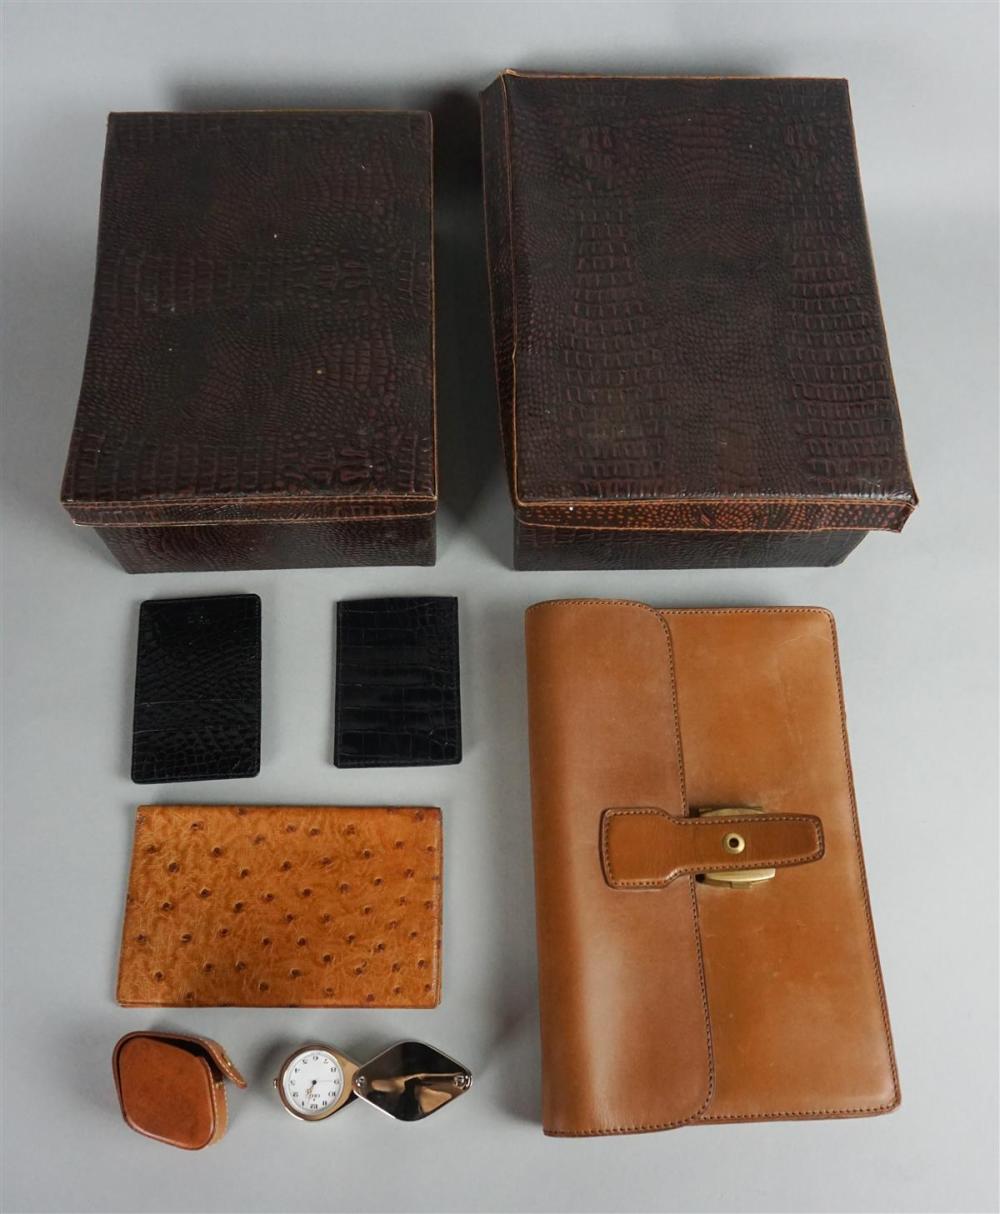 GROUP OF LEATHER AND SKIN ACCESSORIESGROUP